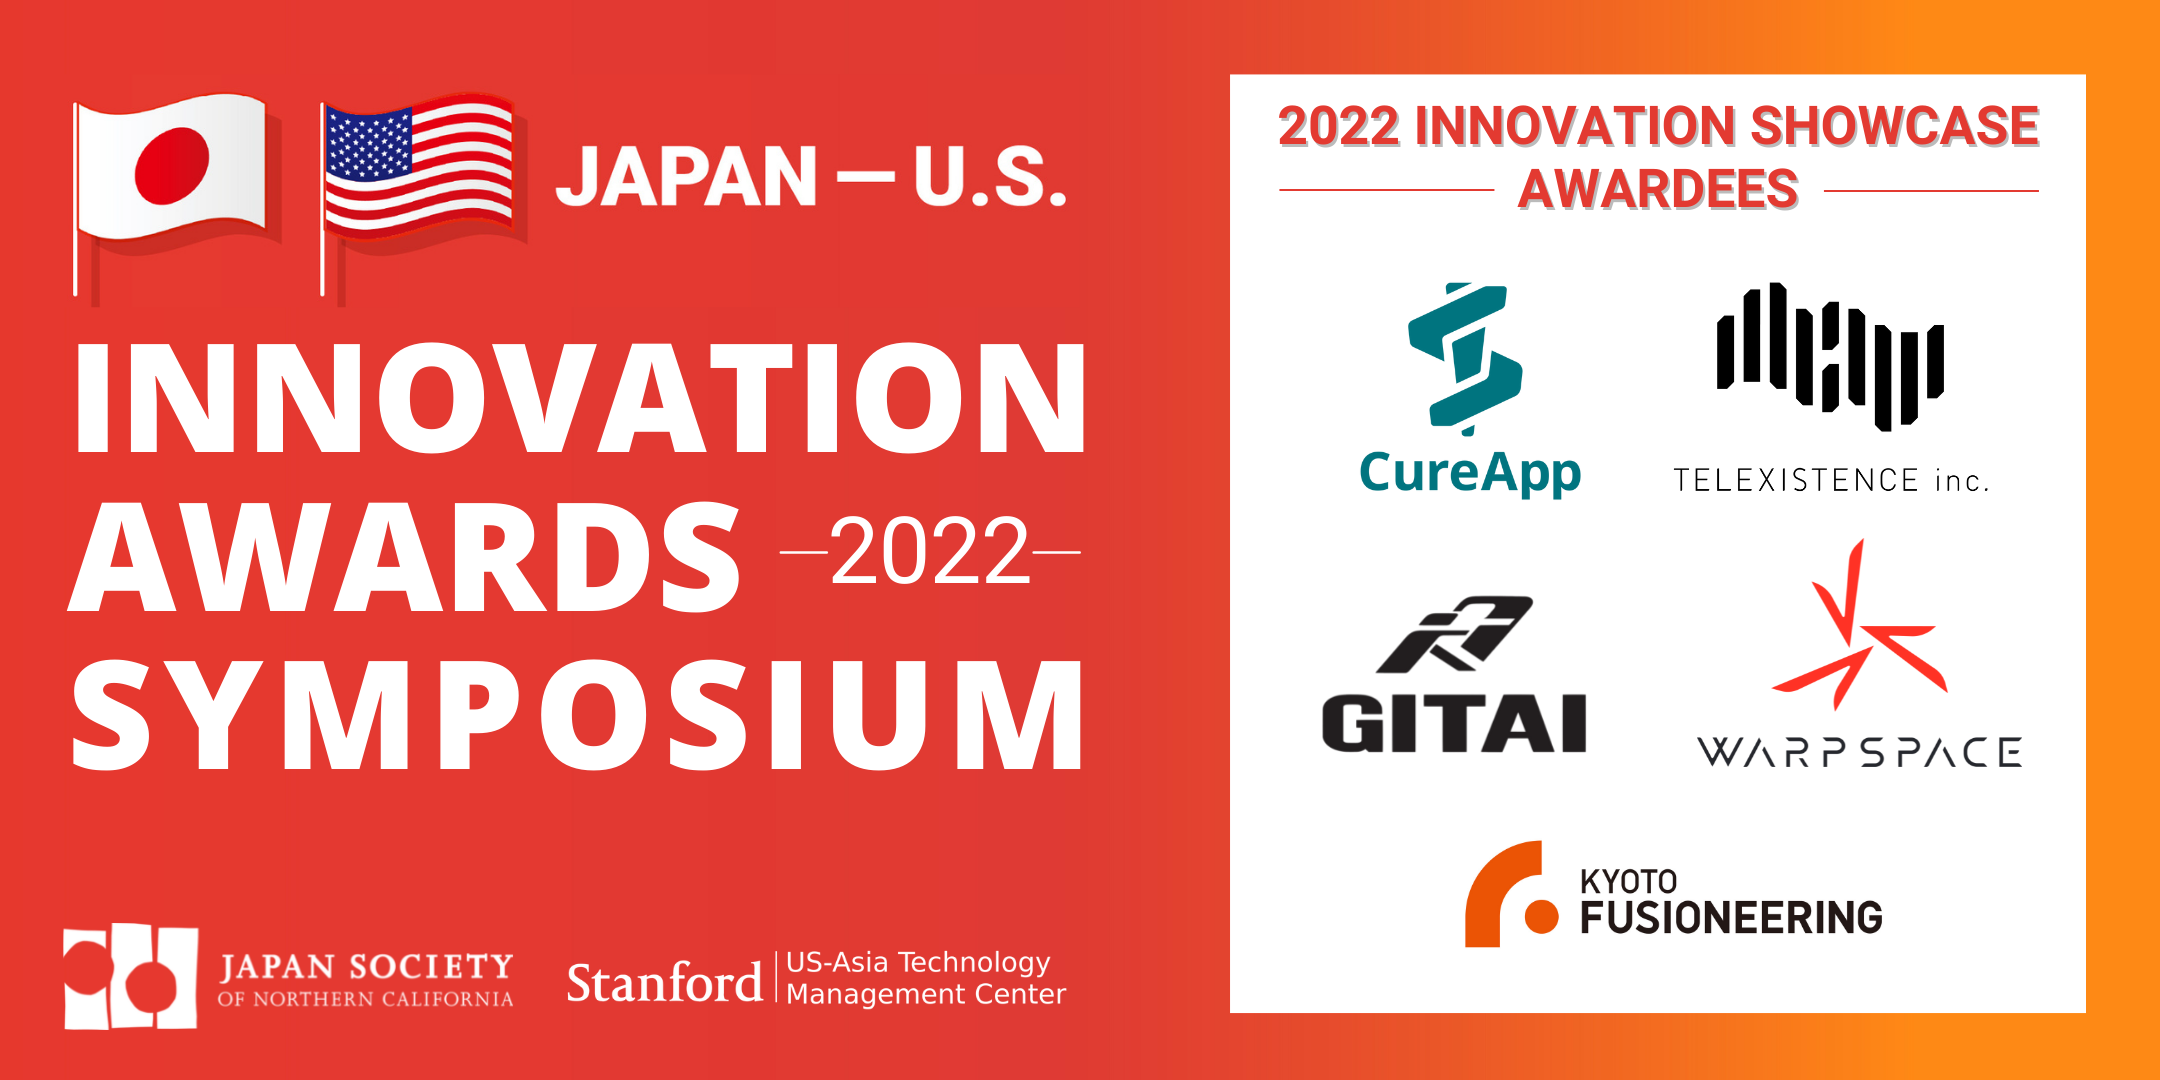 Five Japanese Startup Companies to be Featured in Innovation Showcase of 2022 Japan – U.S. Innovation Awards Program